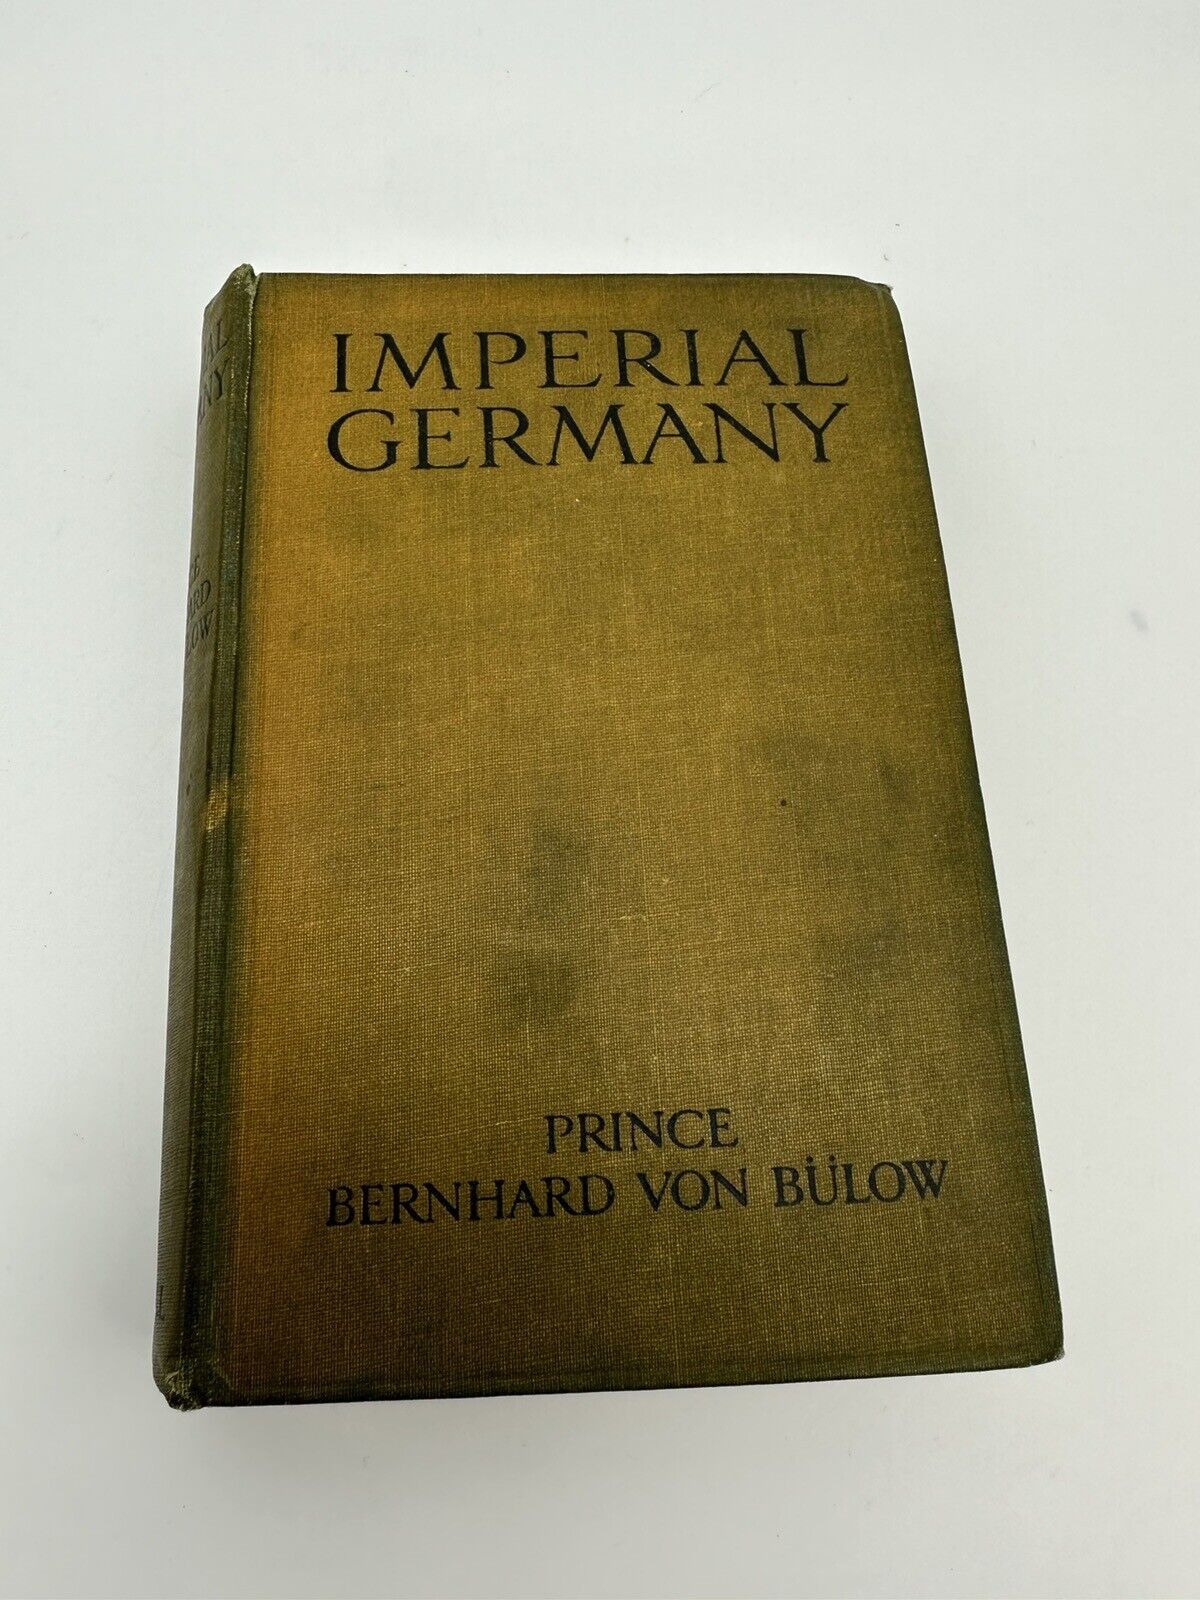 IMPERIAL GERMANY 1914 BY PRINCE BERNHARD VON BÜLOW TRANSLATED BY MARIE A LEWENZ